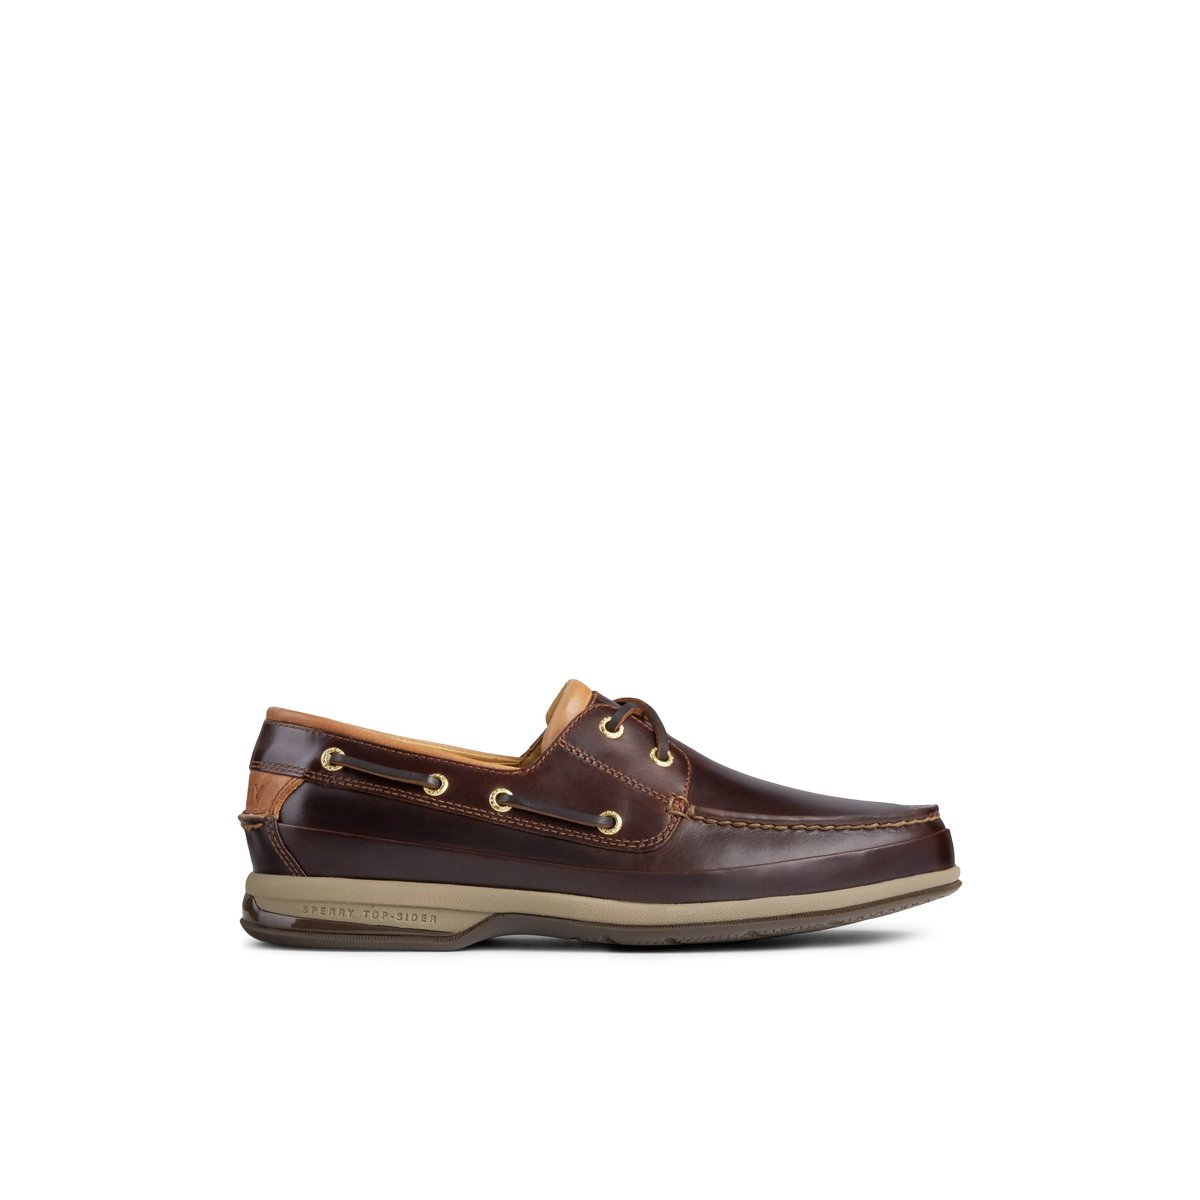 Gold Cup Luxury Collection: Men's Boat Shoes, Penny Loafers, Boots ...